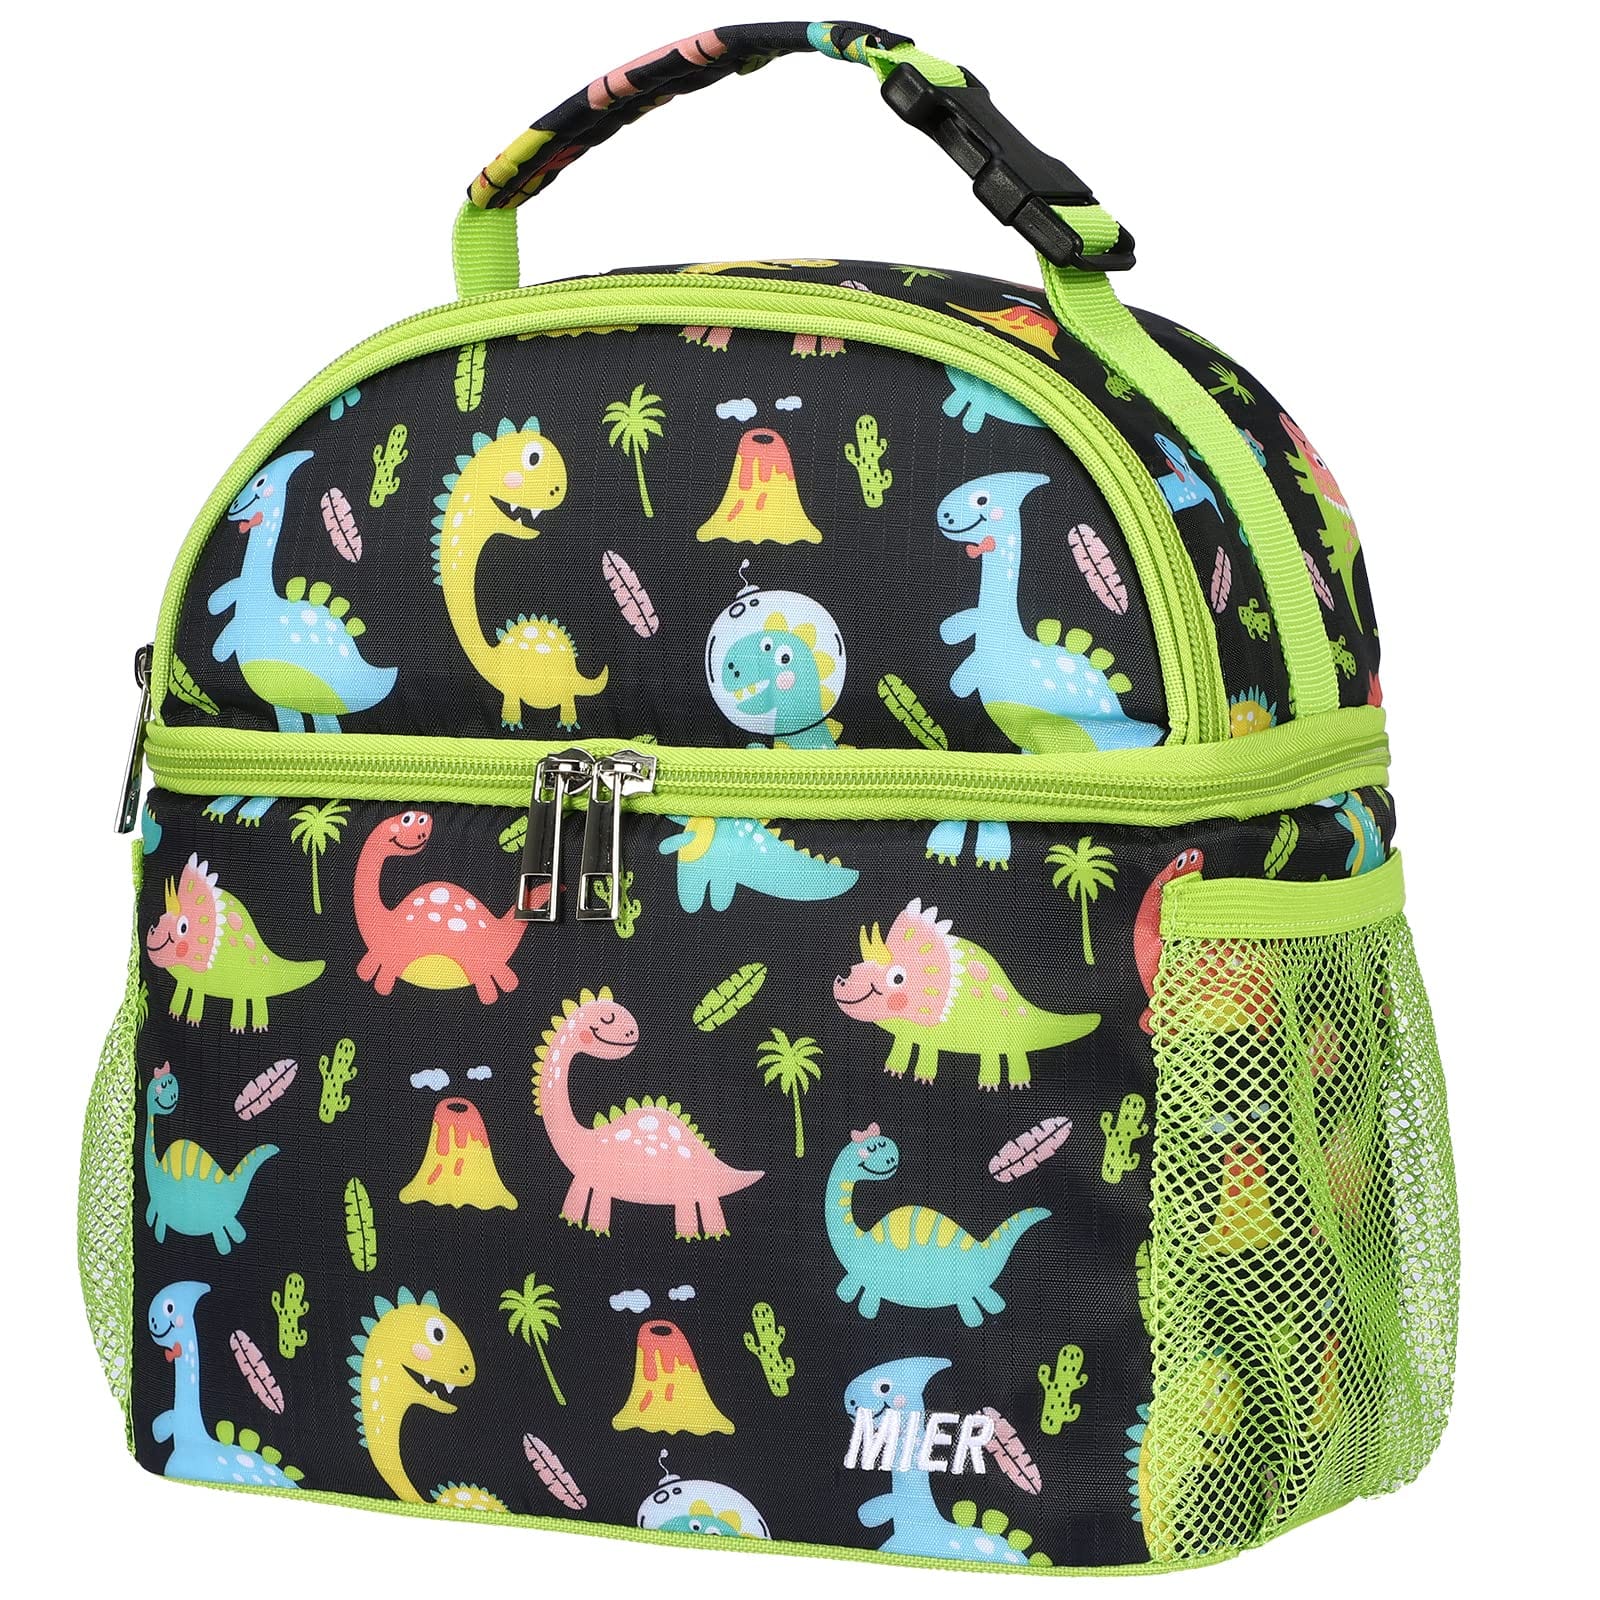 Kids Lunch Bag Insulated Toddlers Lunch Cooler Tote Lunch Bag Black Green Dinosaur MIER